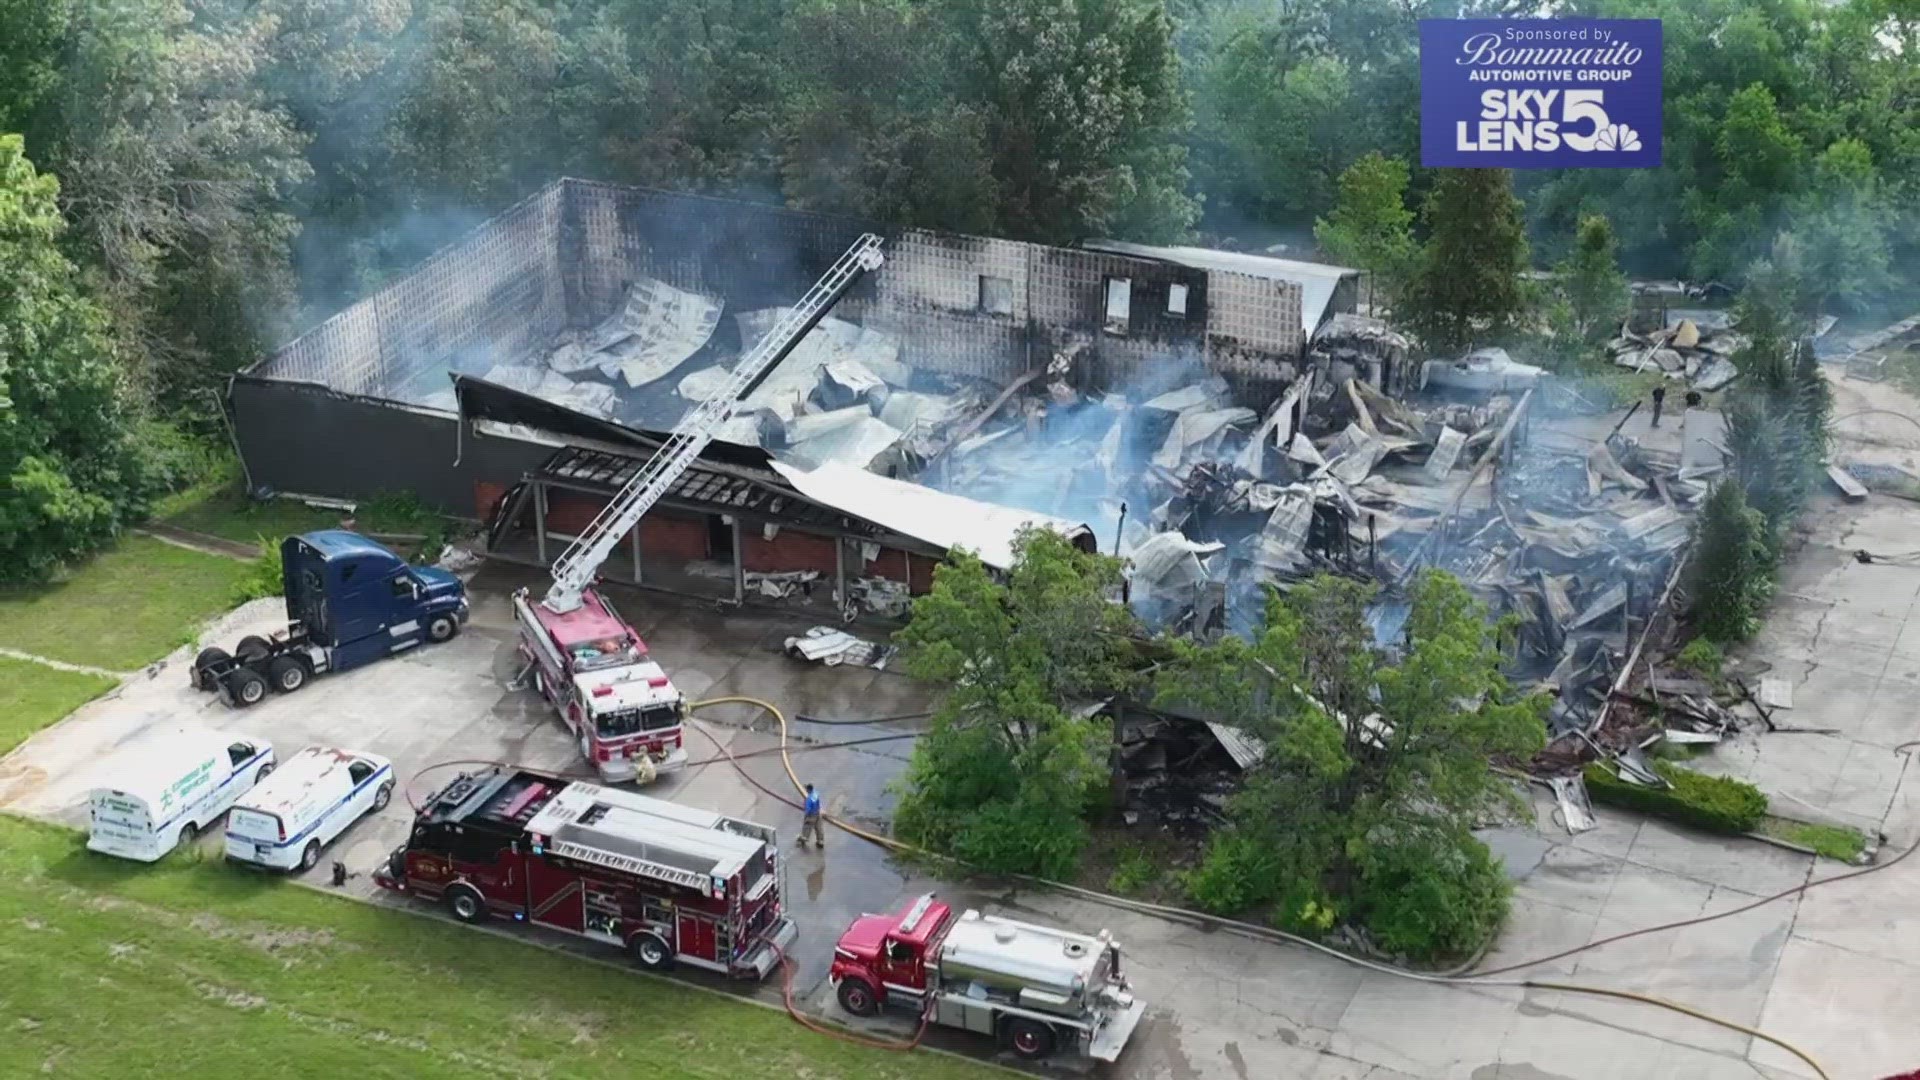 A fire destroyed a church in Missouri Monday. Some believe the fire may have been intentionally set.